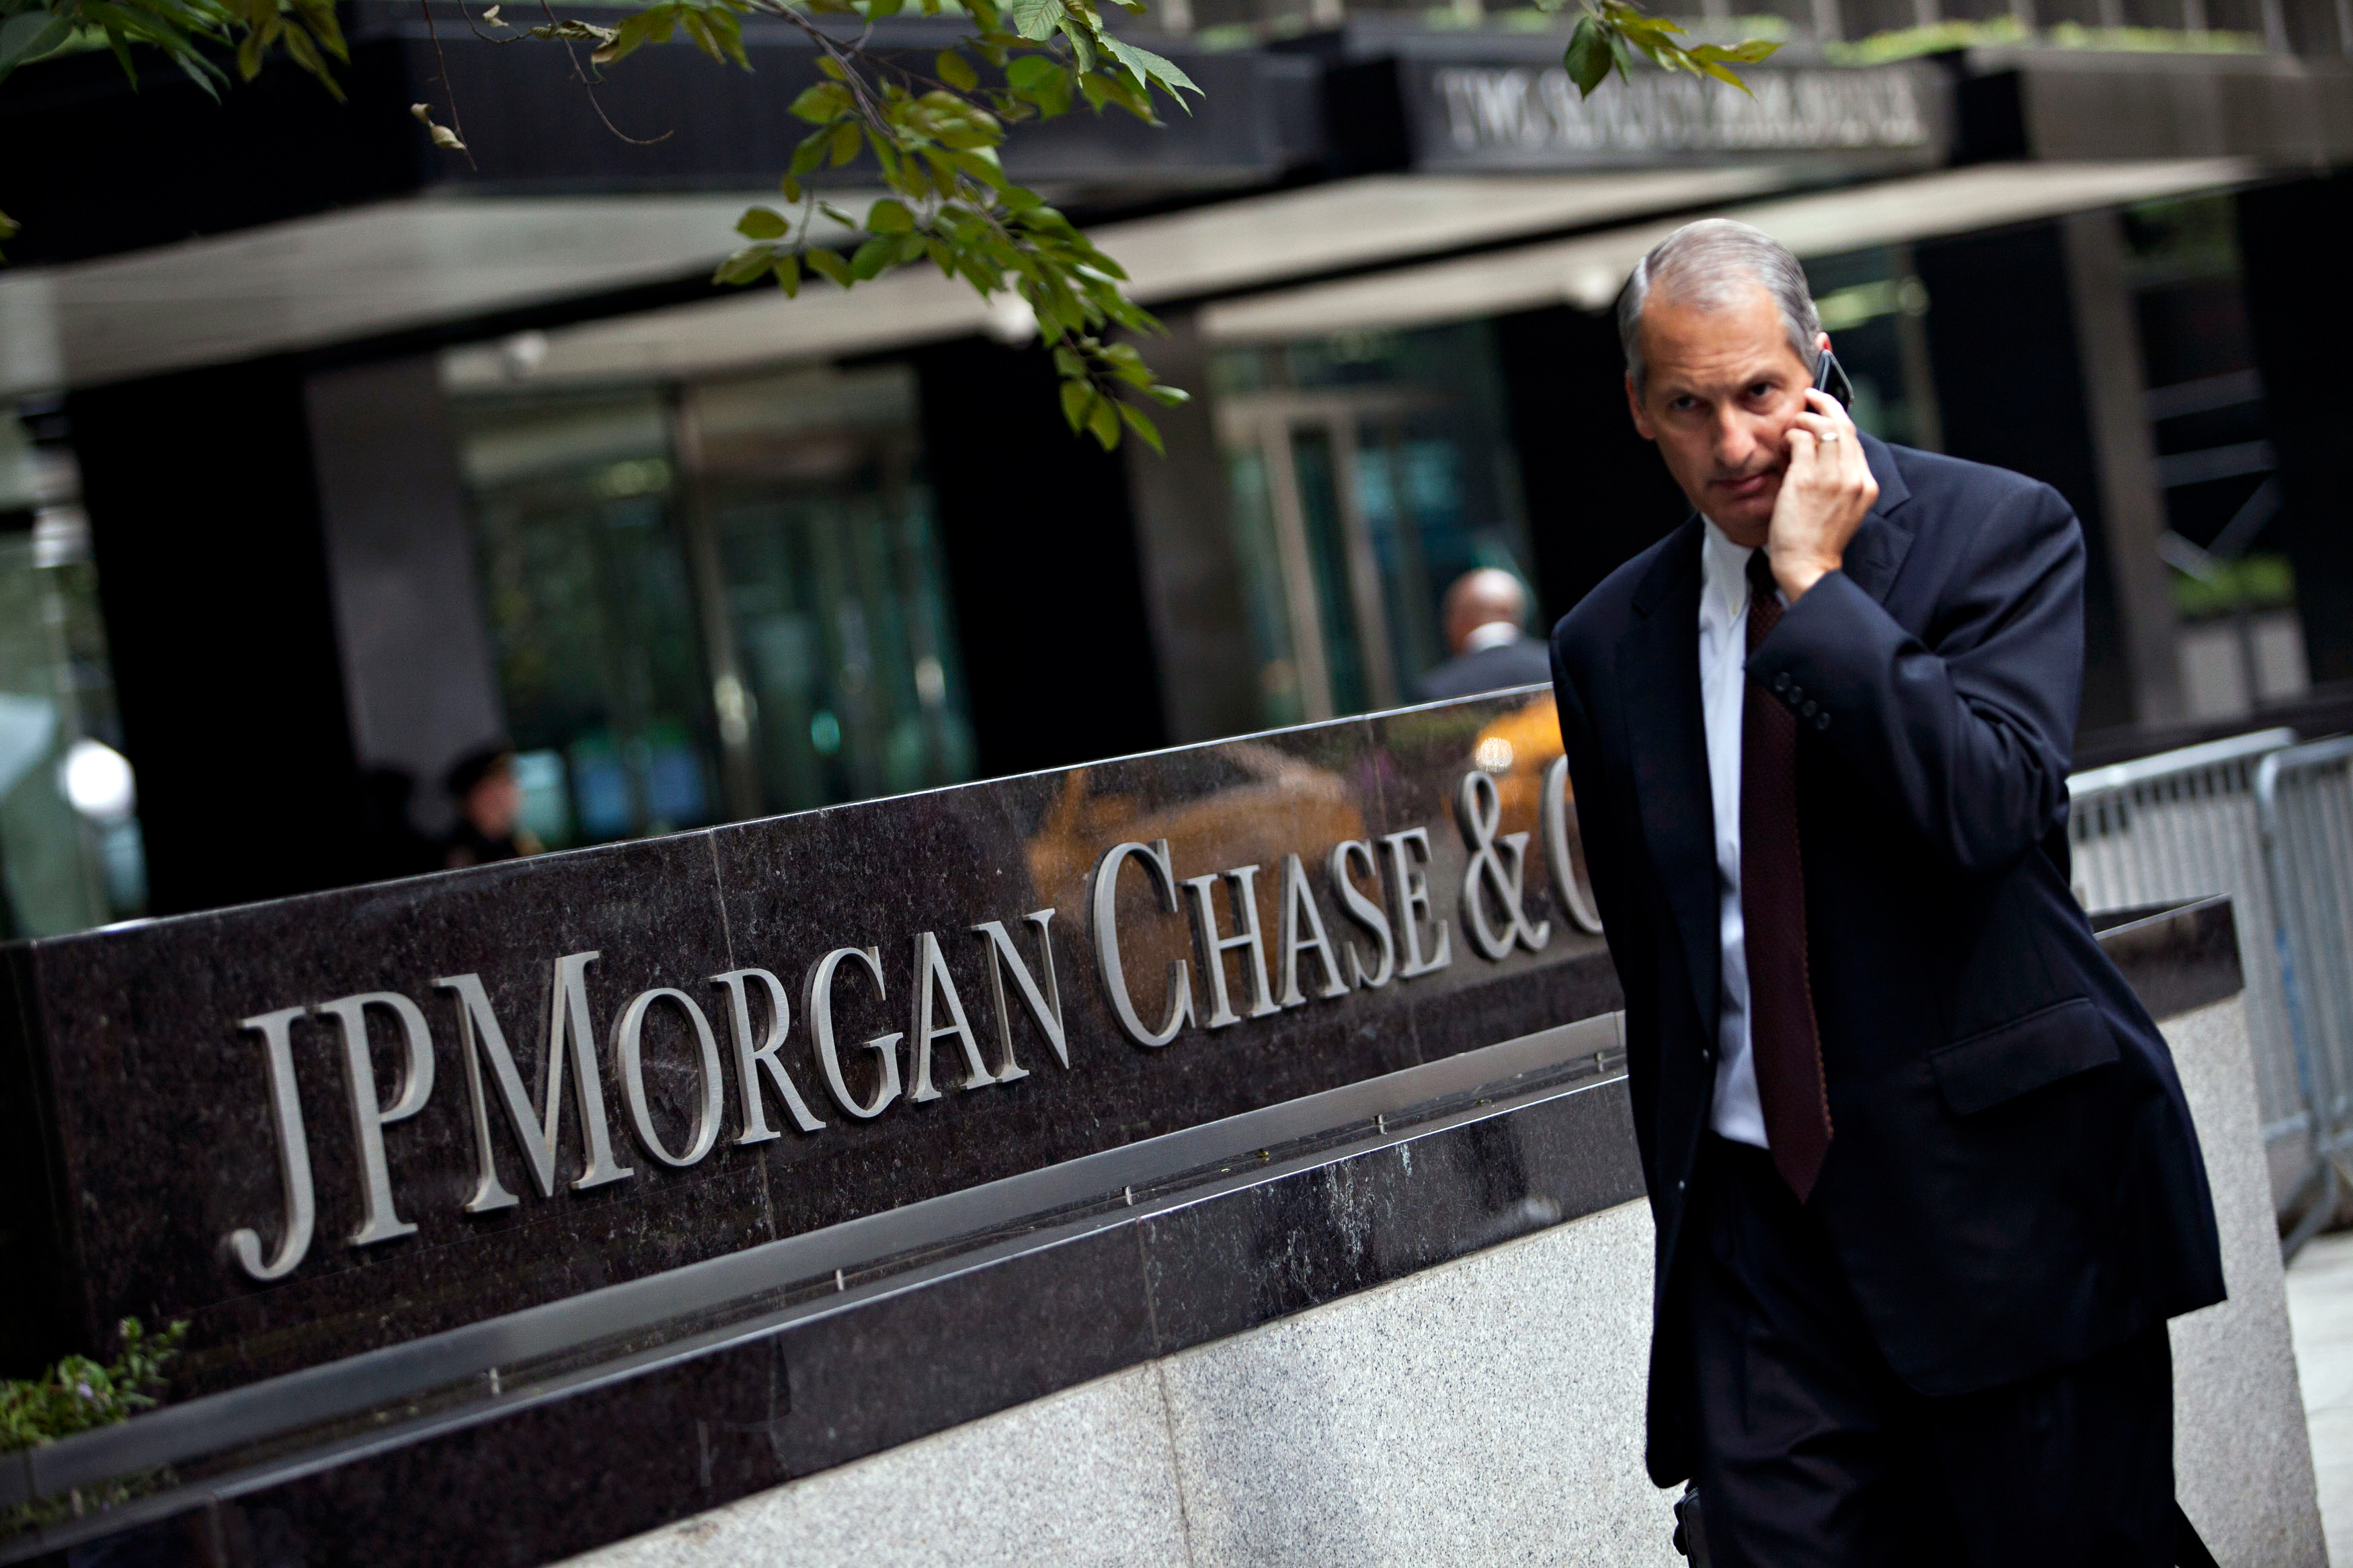 A man walks past JP Morgan Chase's international headquarters on Park Avenue in New York.